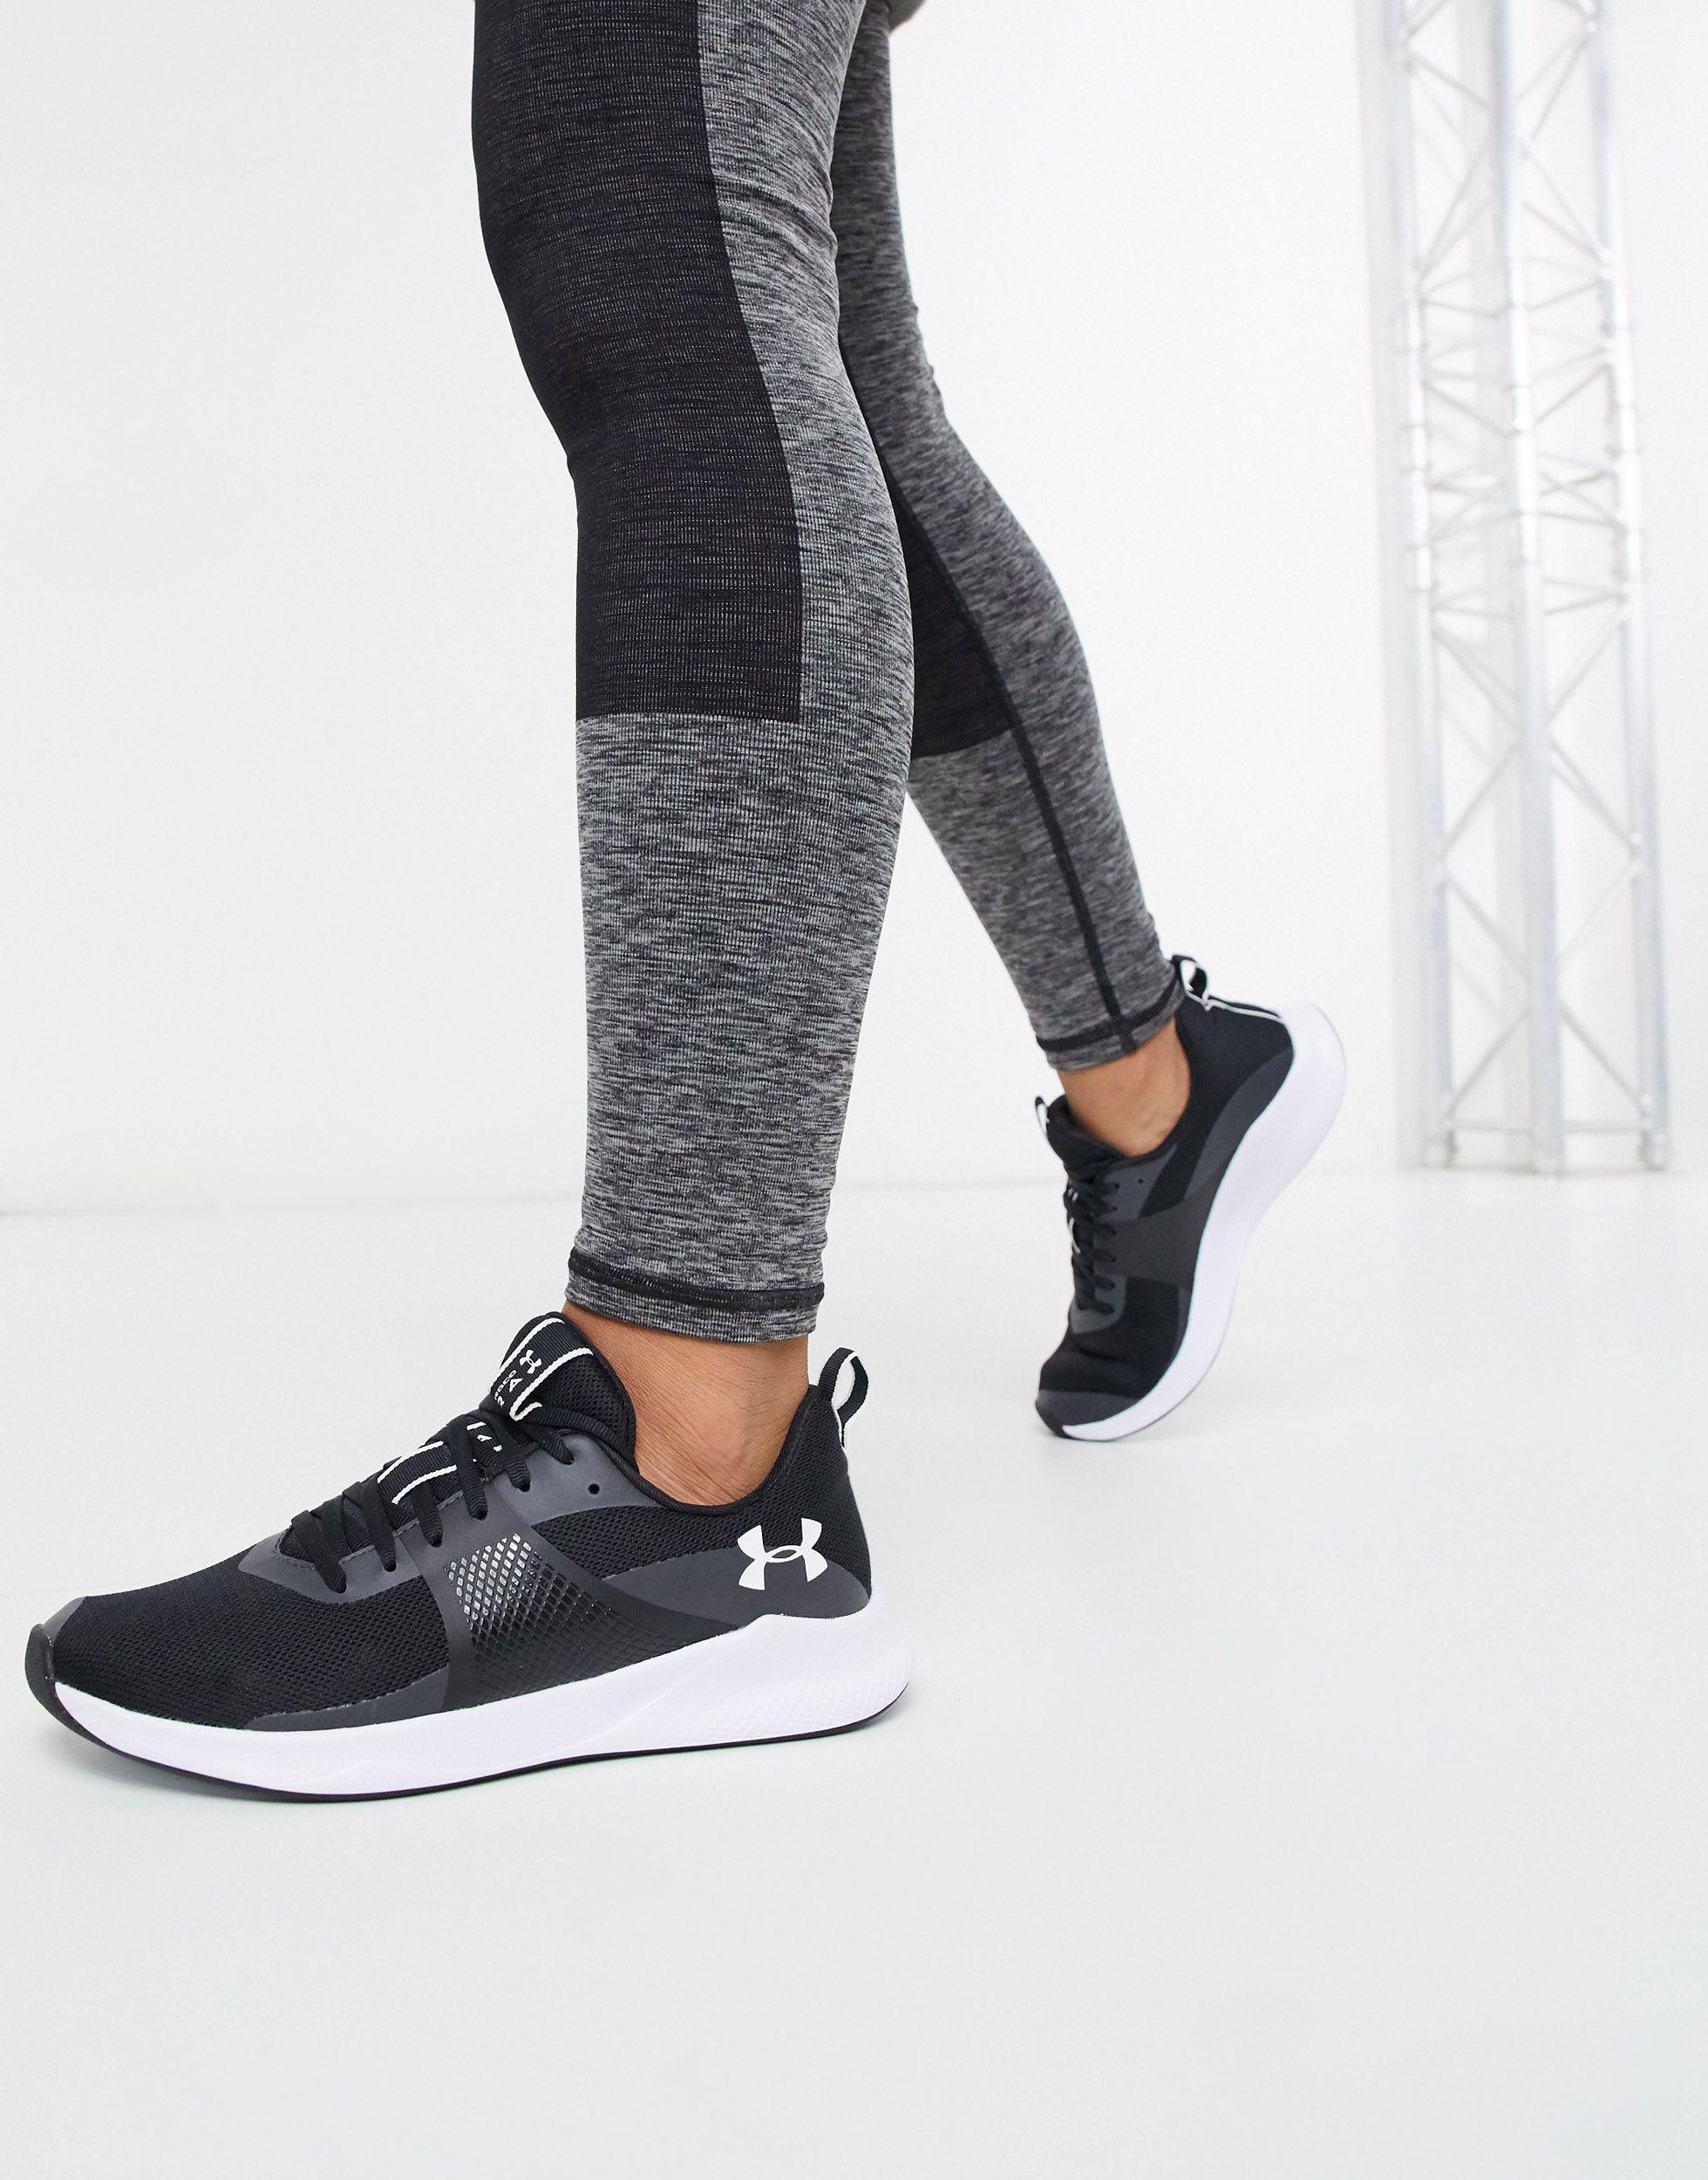 Under Armour Womens Charged Aurora Cross Trainer 